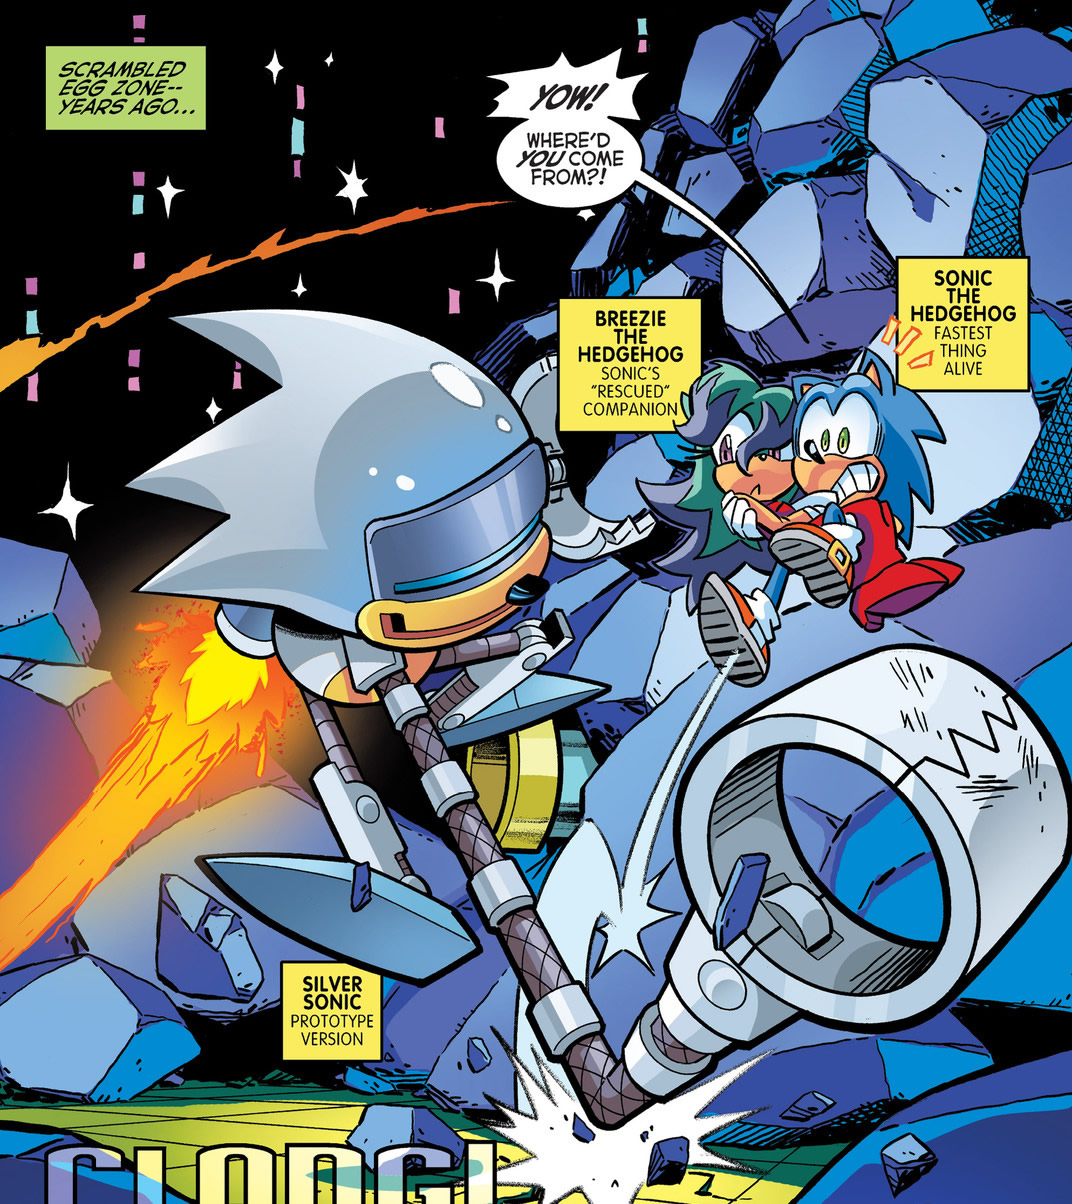 silver in sonic the hedgehog 1